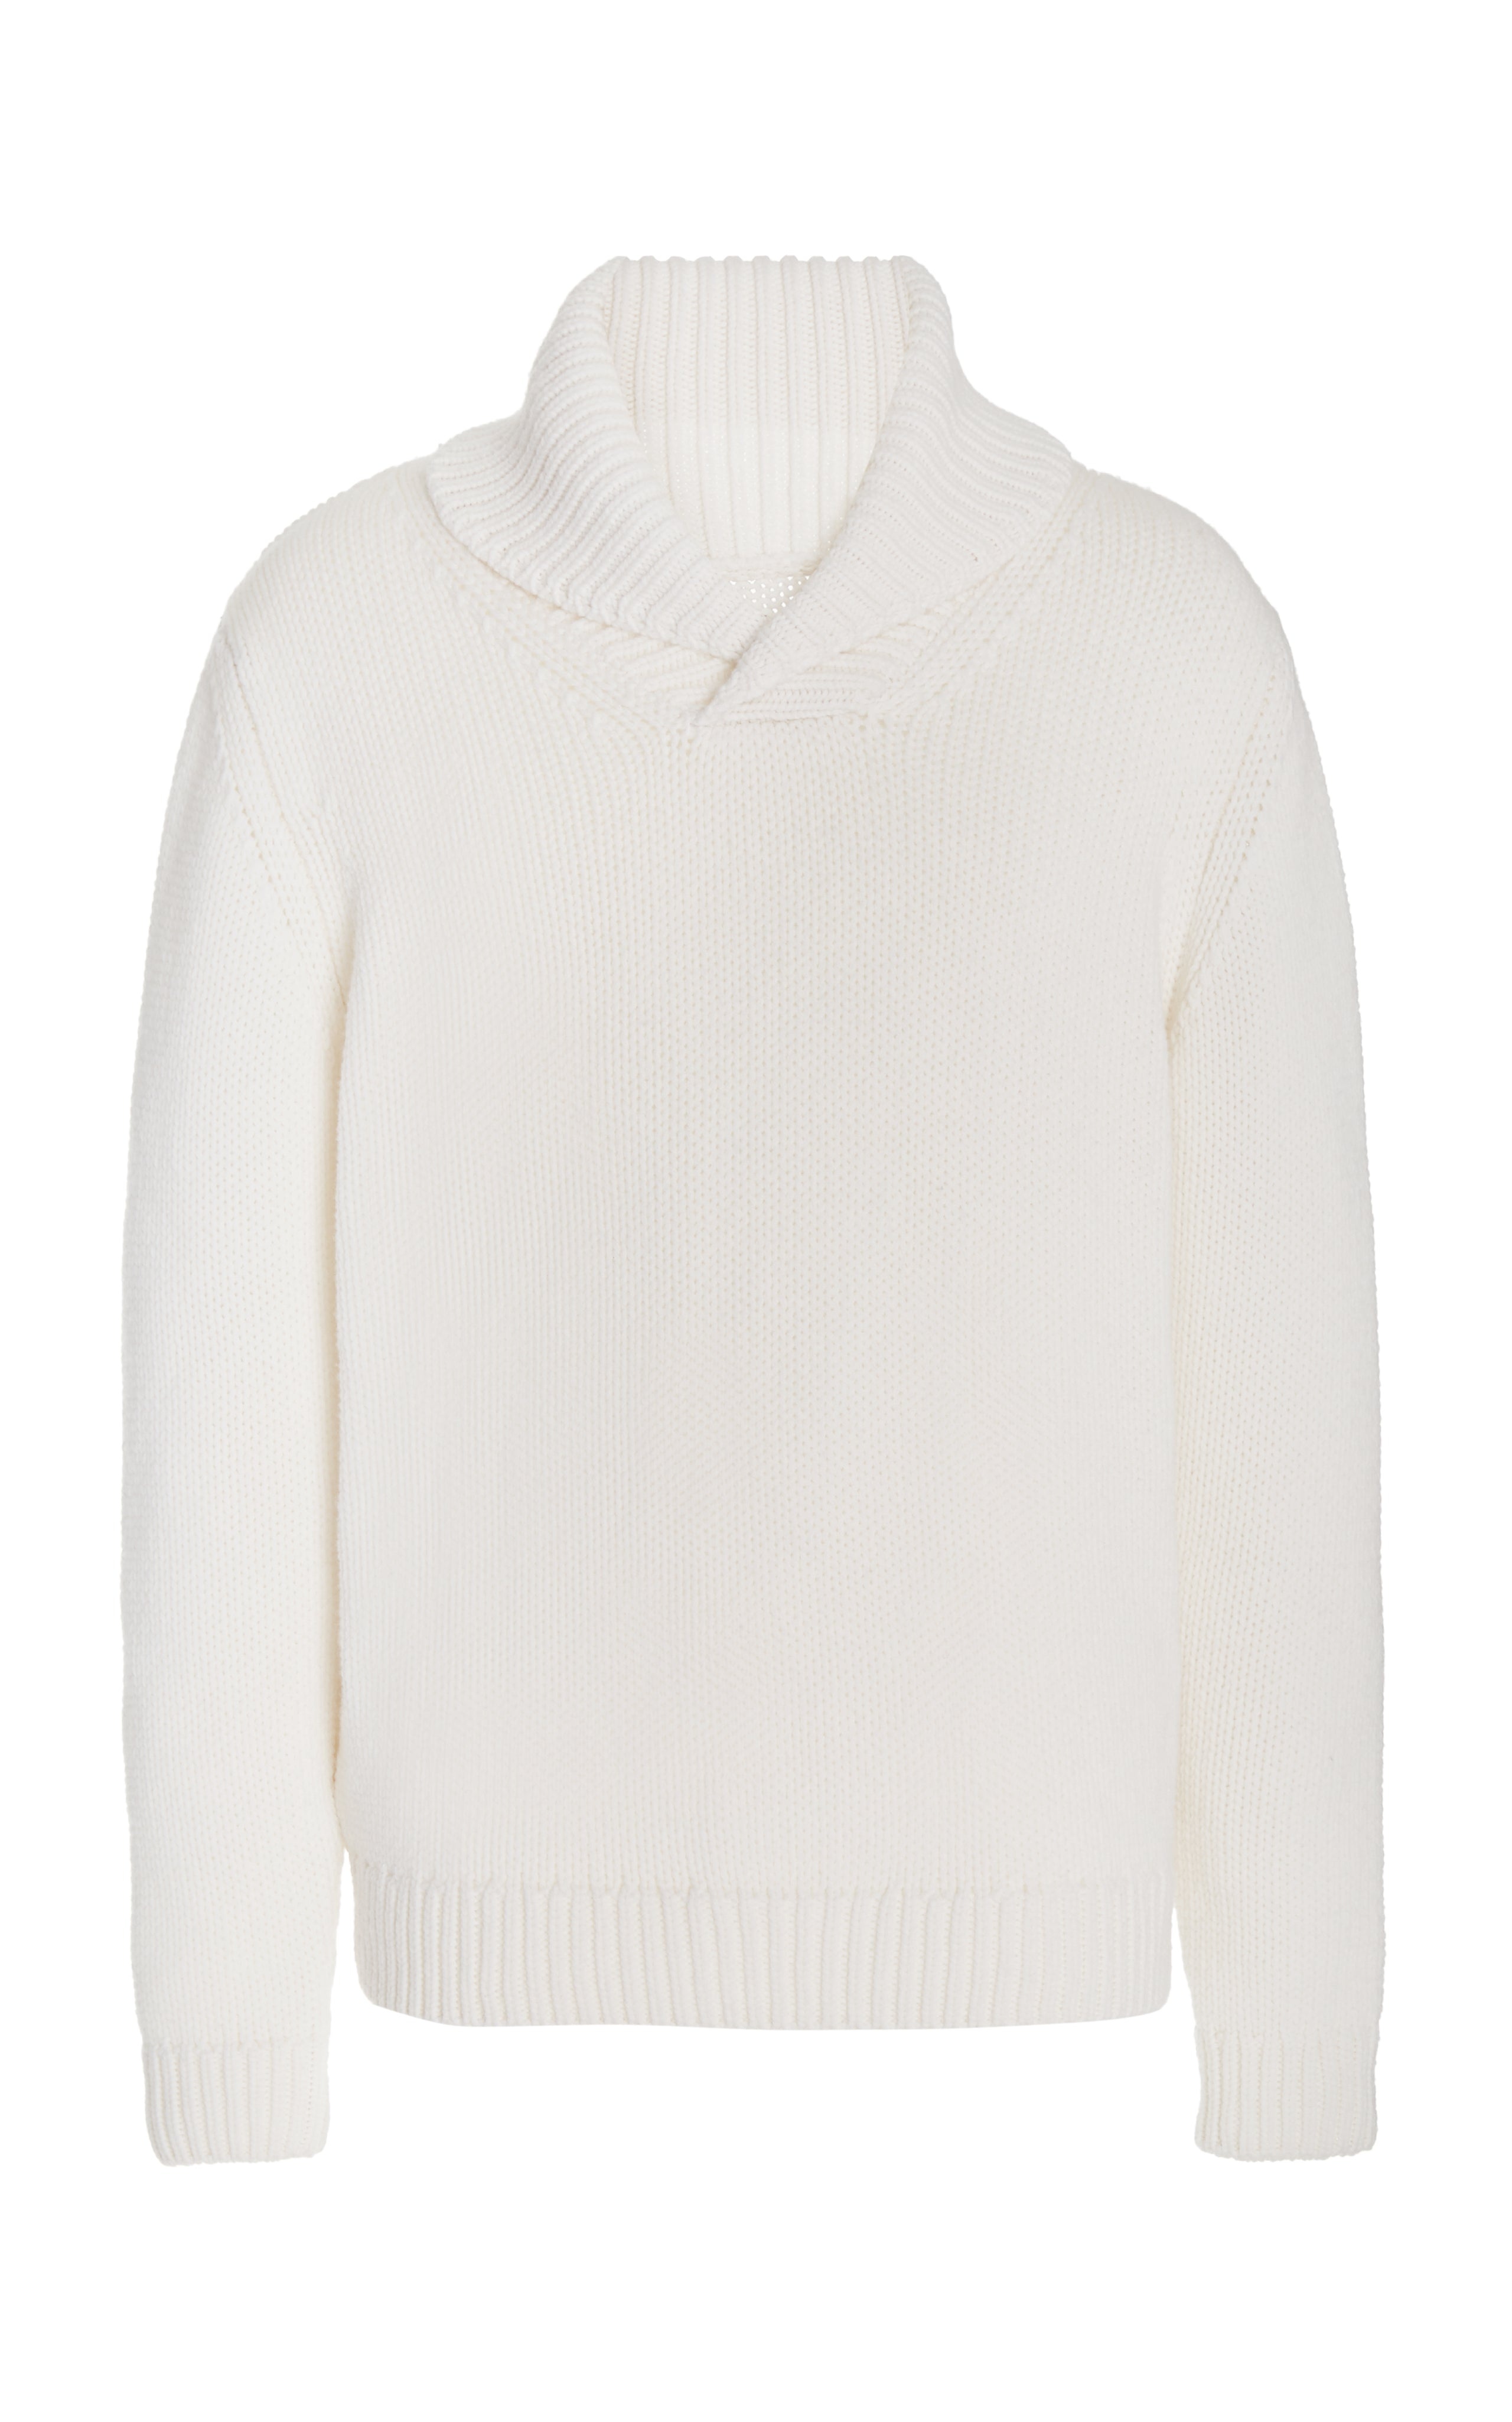 Sal Knit Sweater in Ivory Cashmere - 1